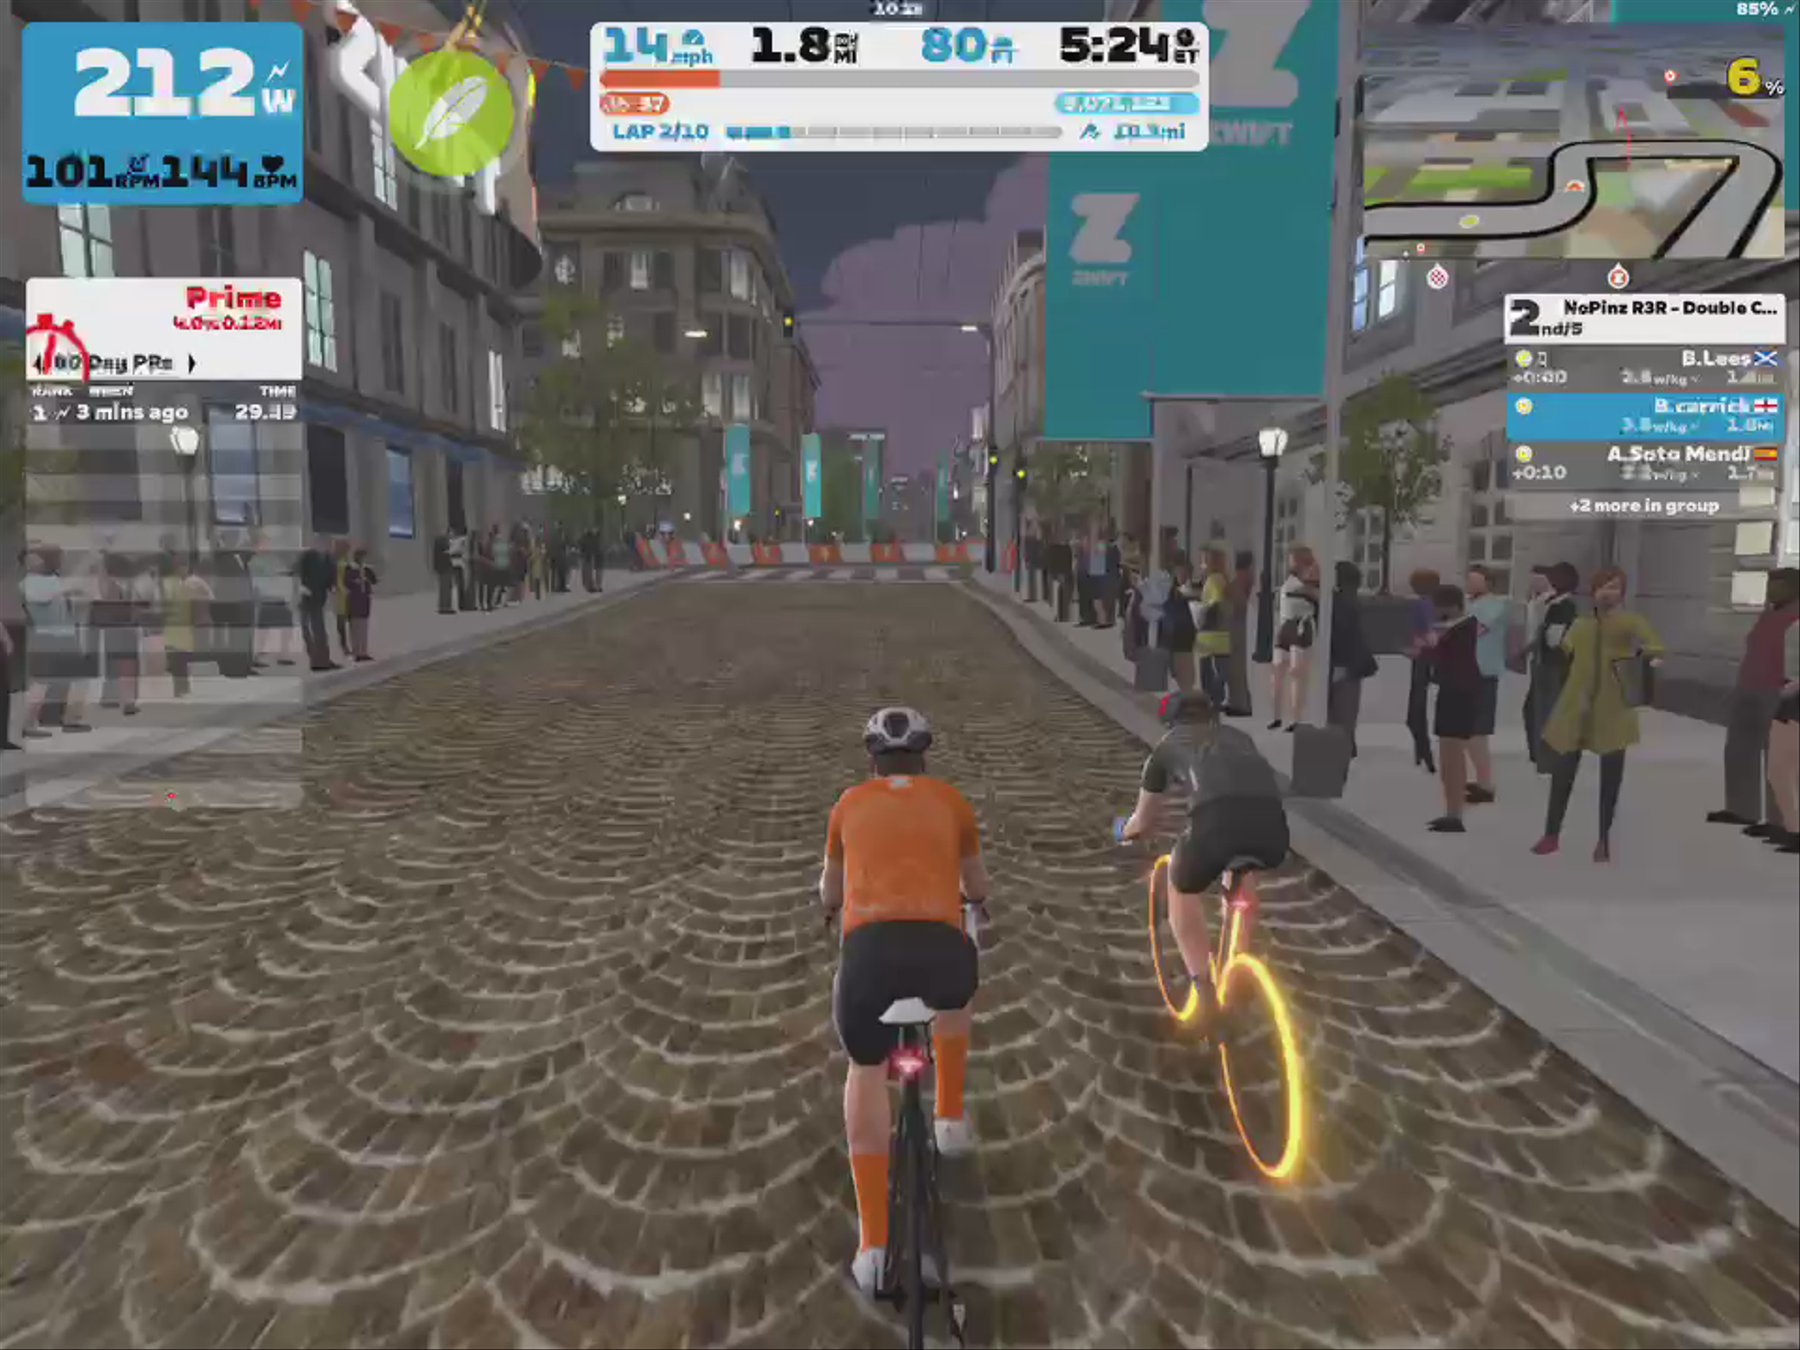 Zwift - Race: NoPinz R3R - Double Crit 1/2 (D) on Downtown Dolphin in Crit City